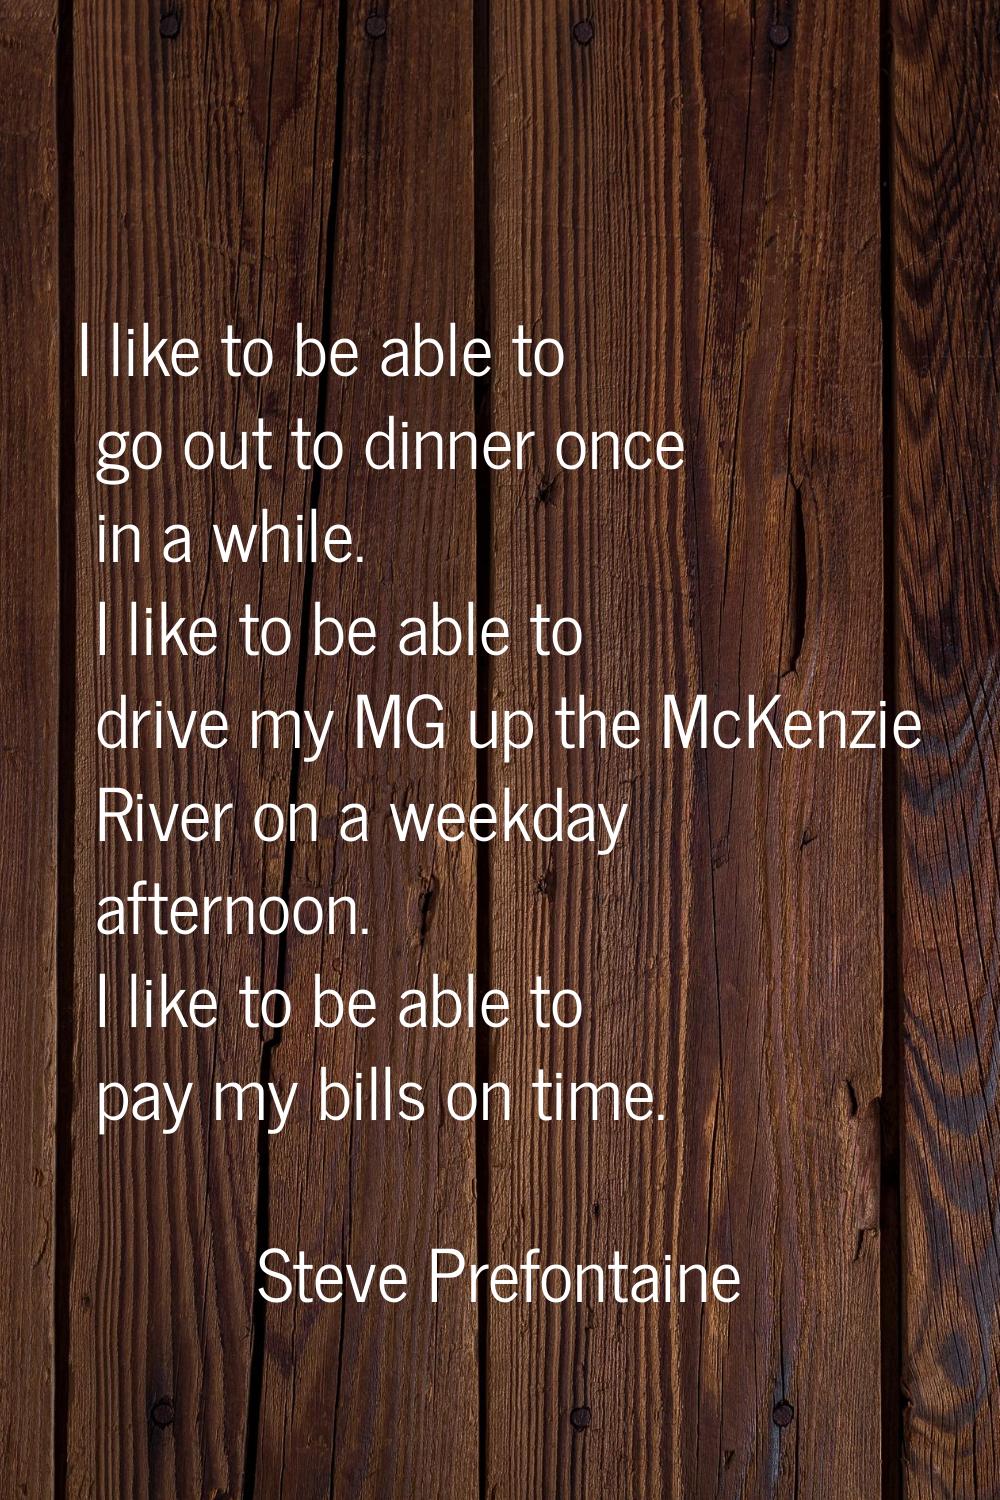 I like to be able to go out to dinner once in a while. I like to be able to drive my MG up the McKe